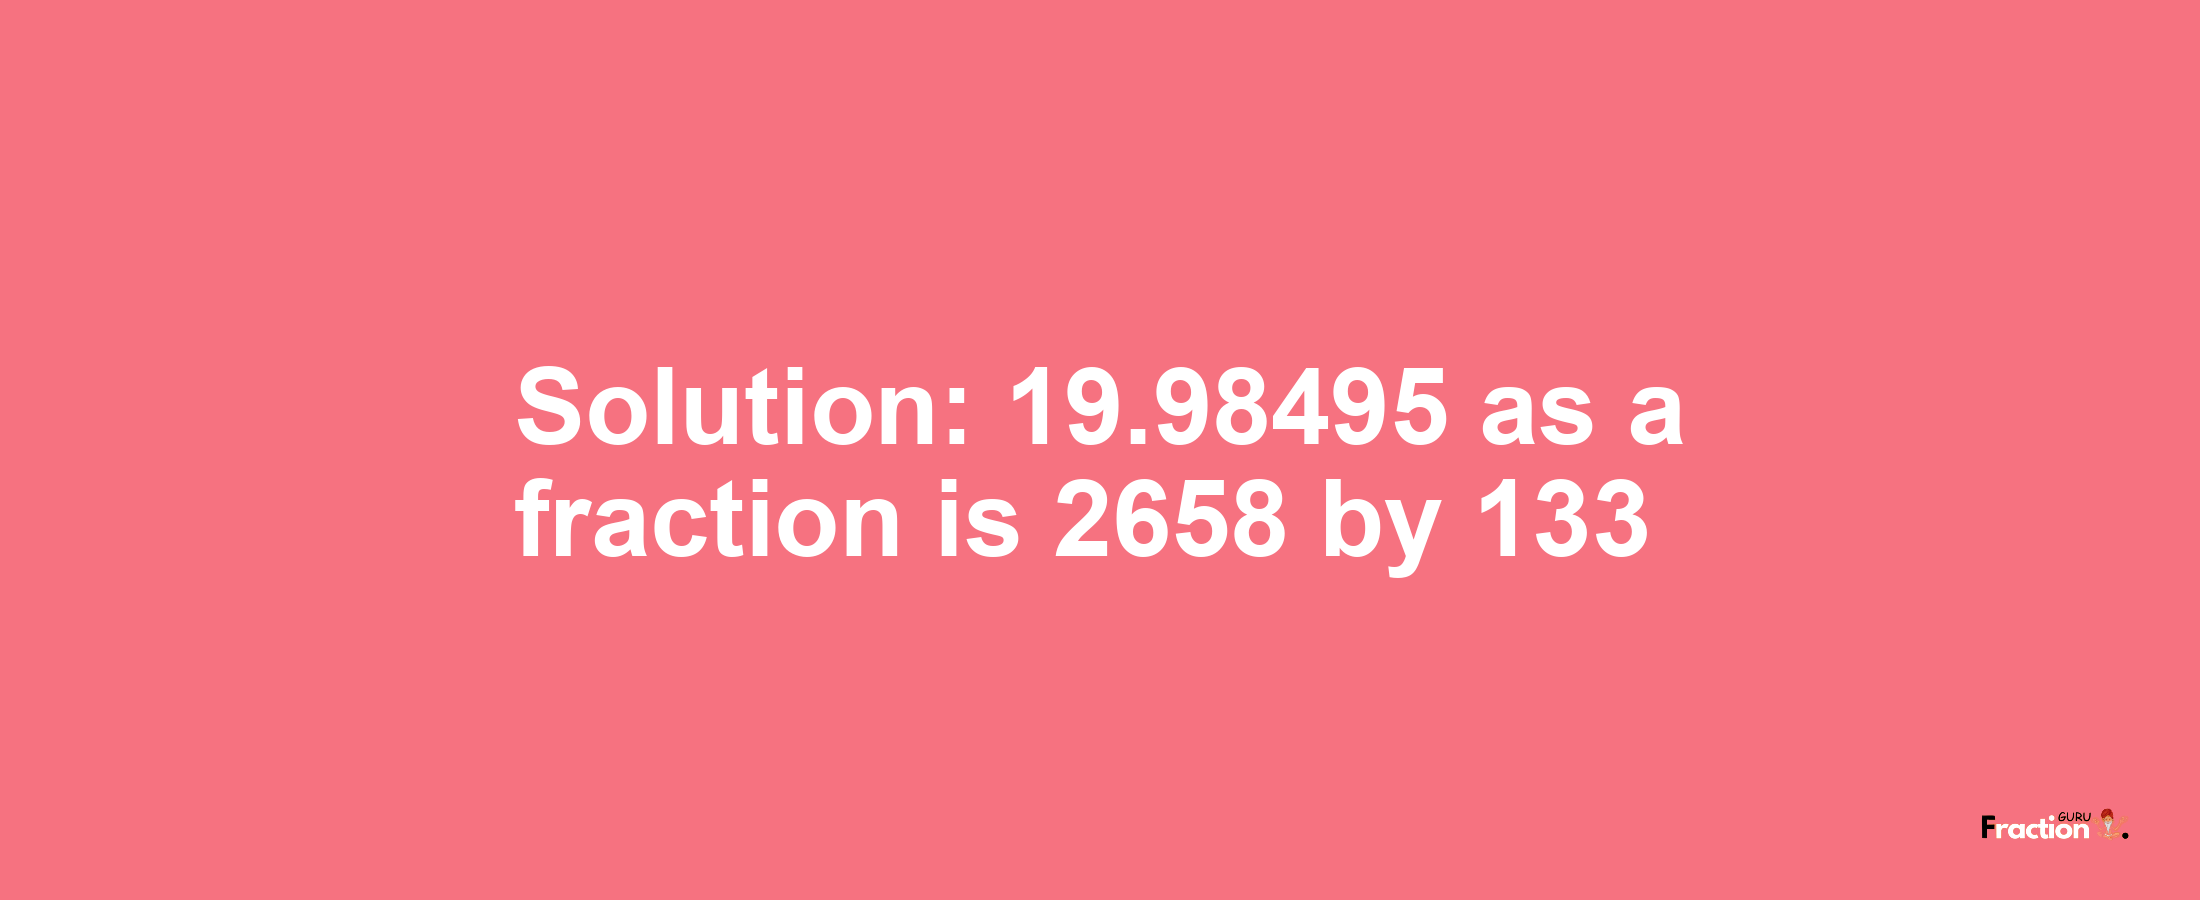 Solution:19.98495 as a fraction is 2658/133